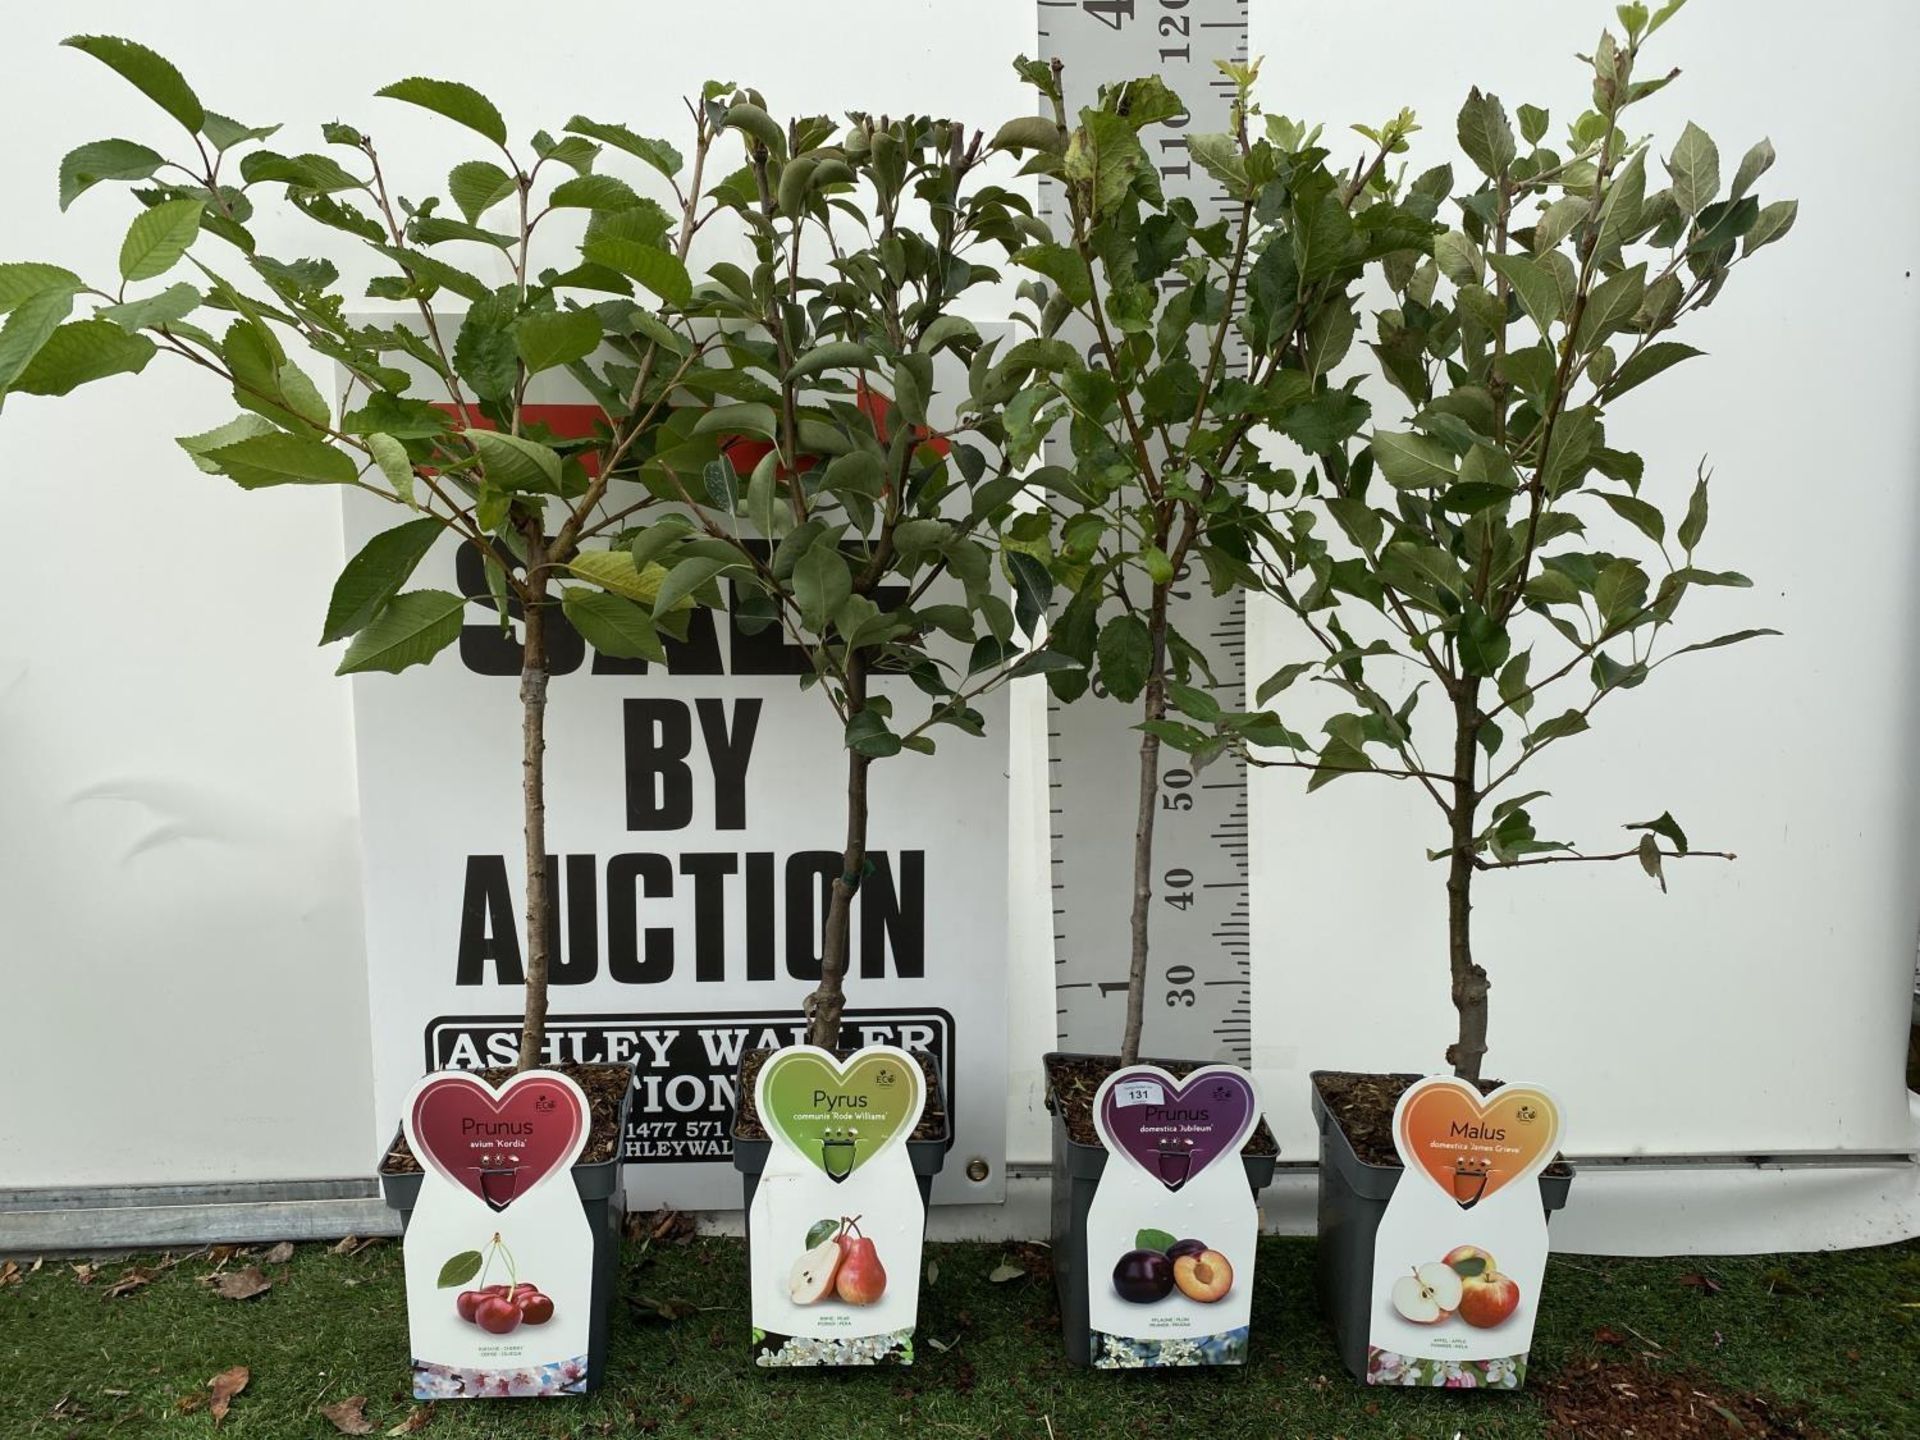 WELCOME TO ASHLEY WALLER HORTICULTURE AUCTION LOTS BEING ADDED DAILY - Image 18 of 21